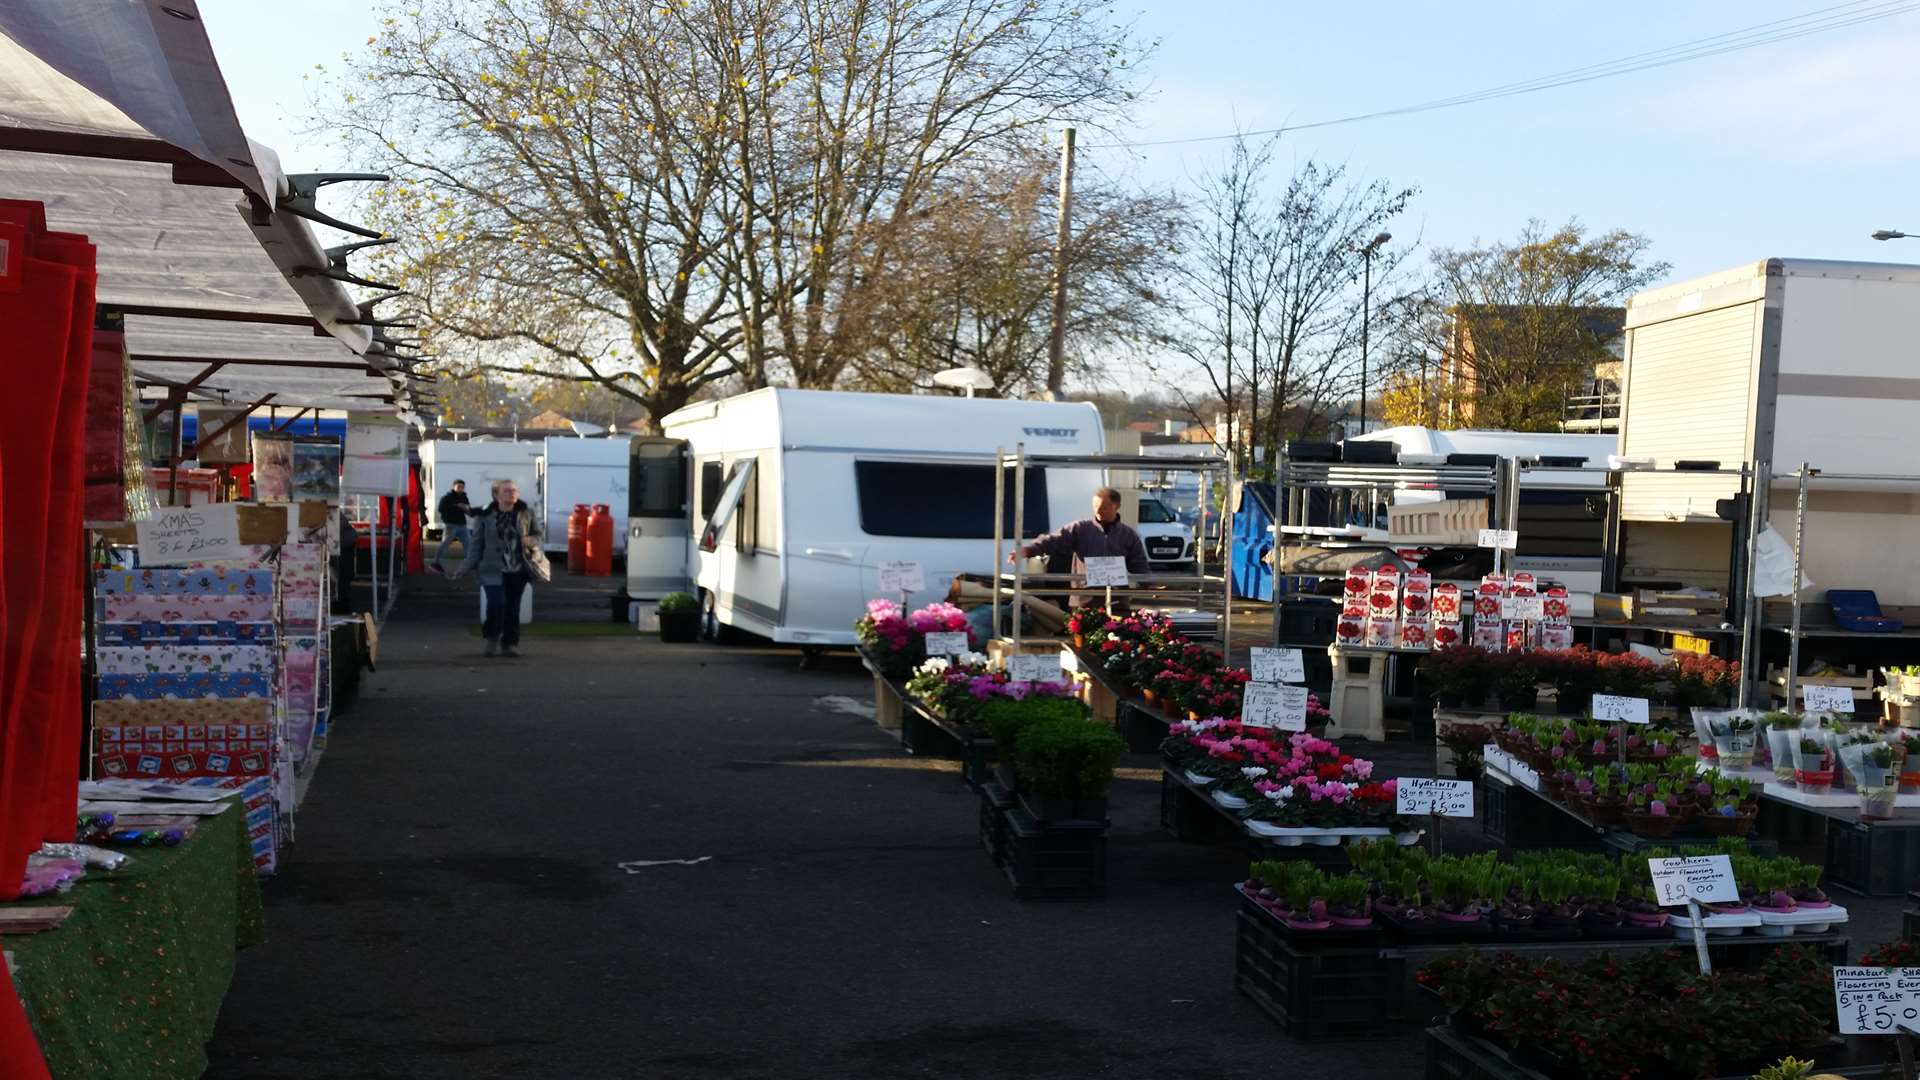 Market traders had to set up their stalls around the caravans.